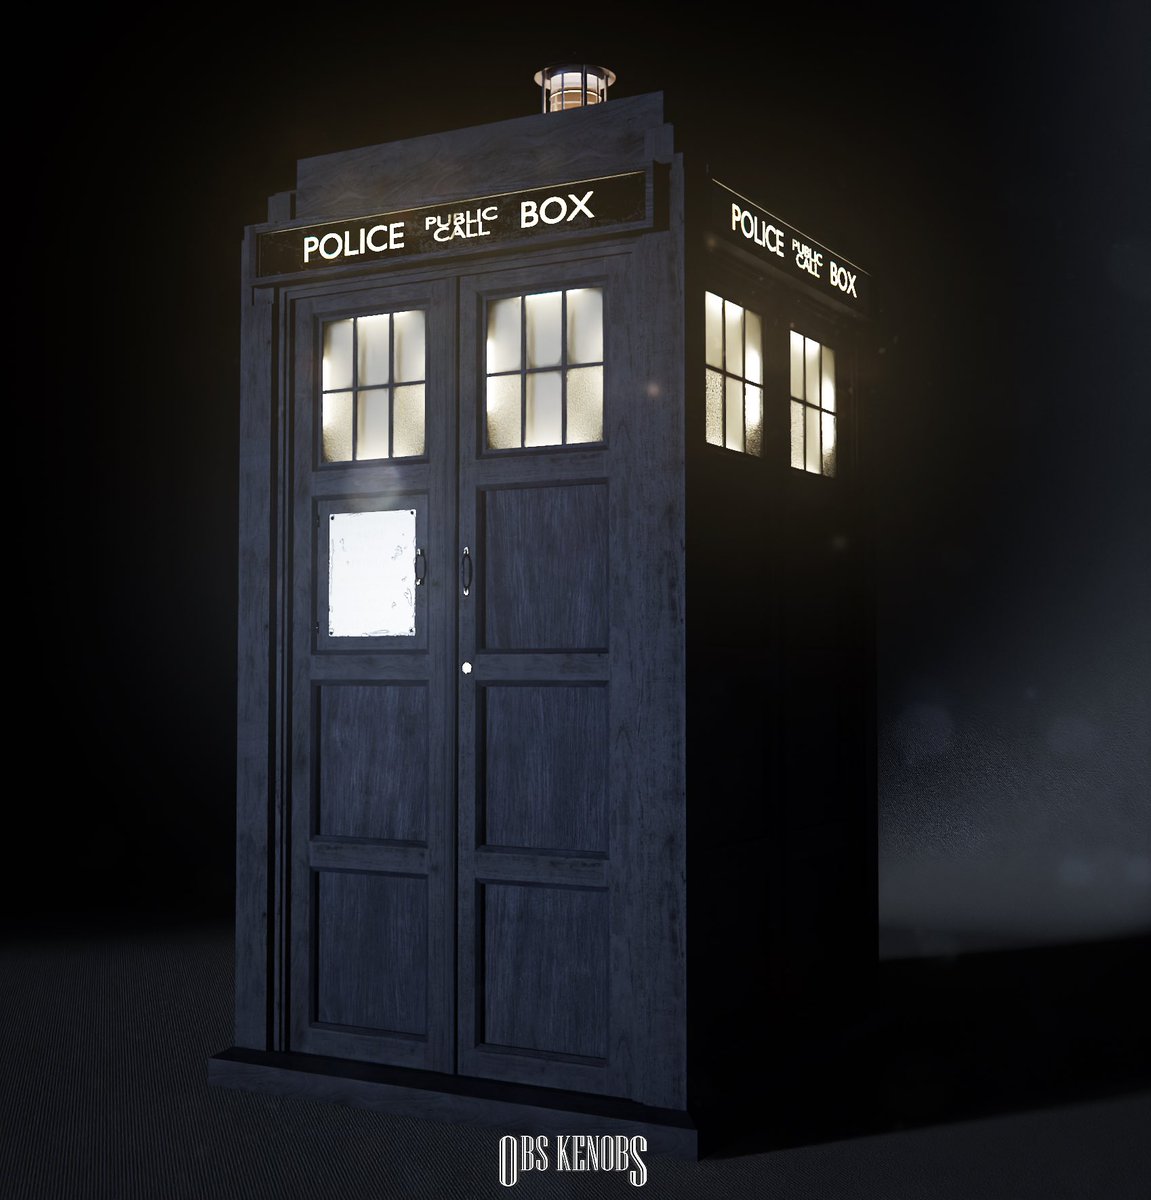 Updated my Tardis model to be more accurate to the prop, what do you all think? #doctorwho #doctorwho60thanniversary #b3d #blender